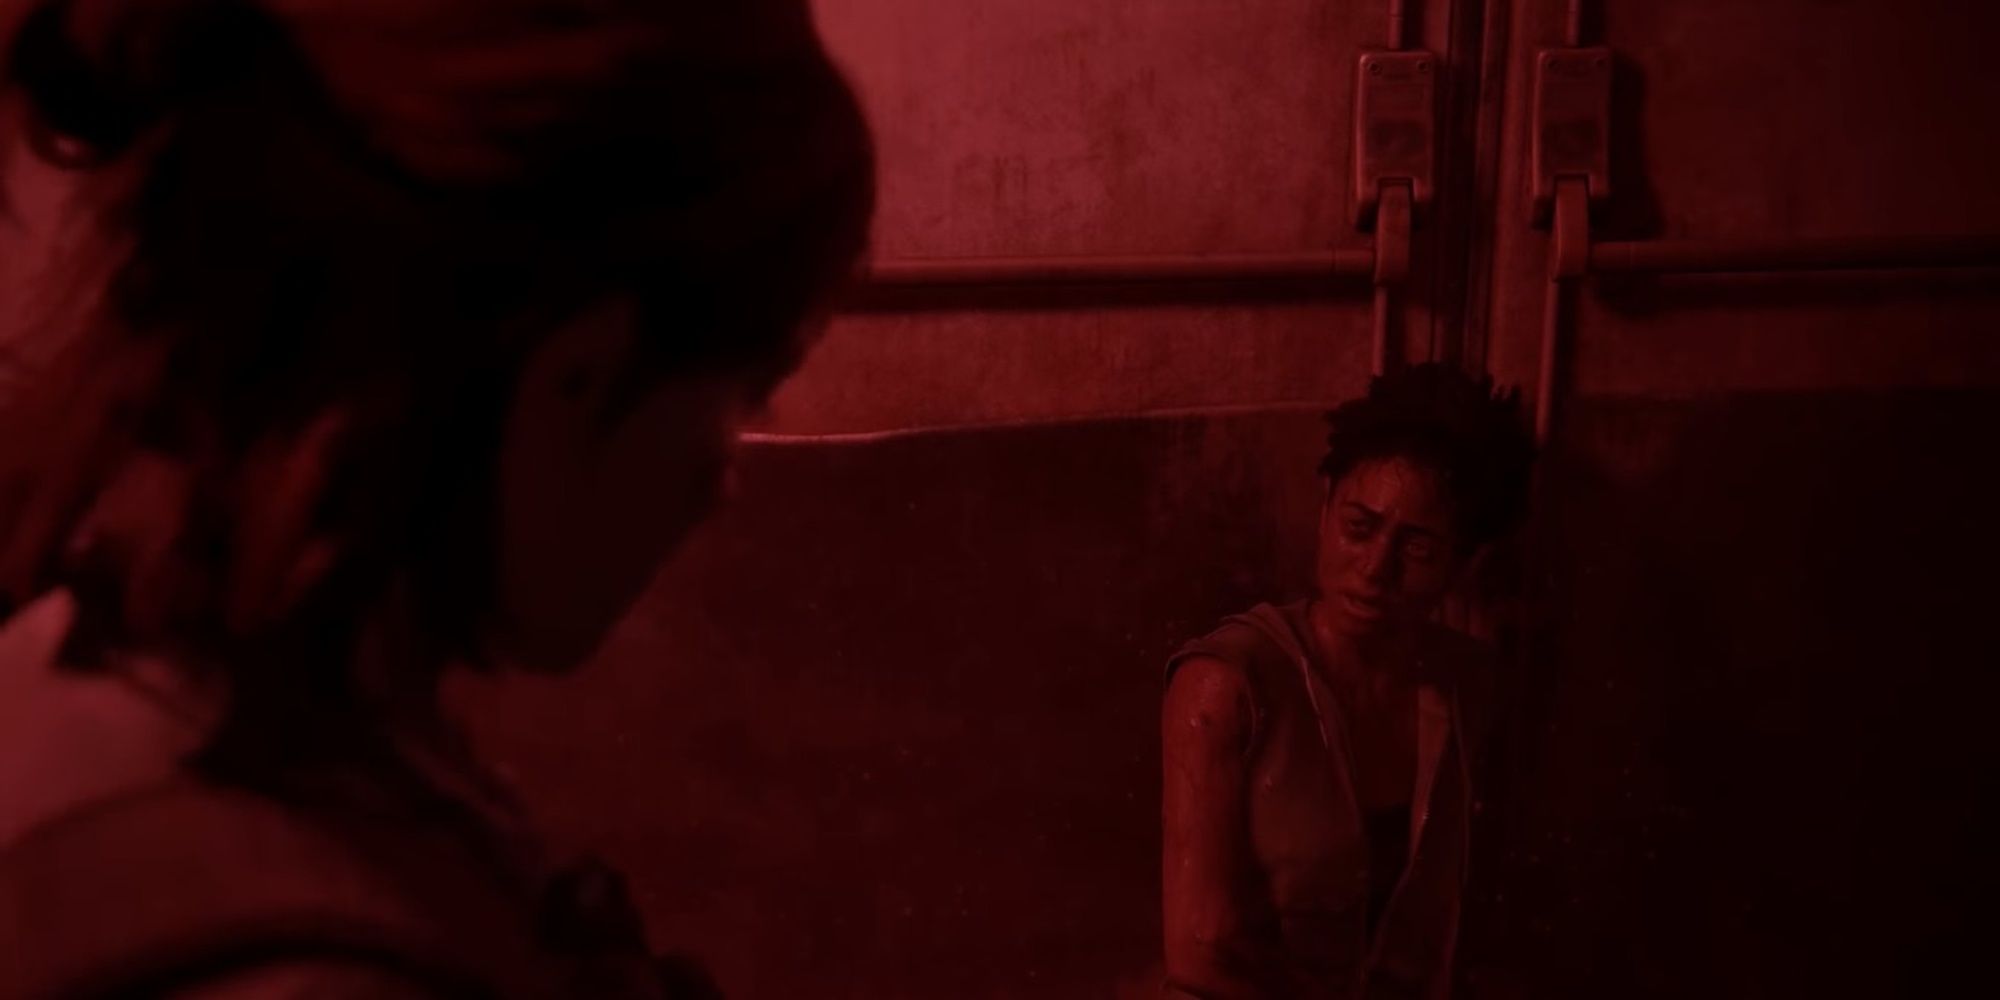 Ellie kills Nora at the hospital in The Last of Us Part 2